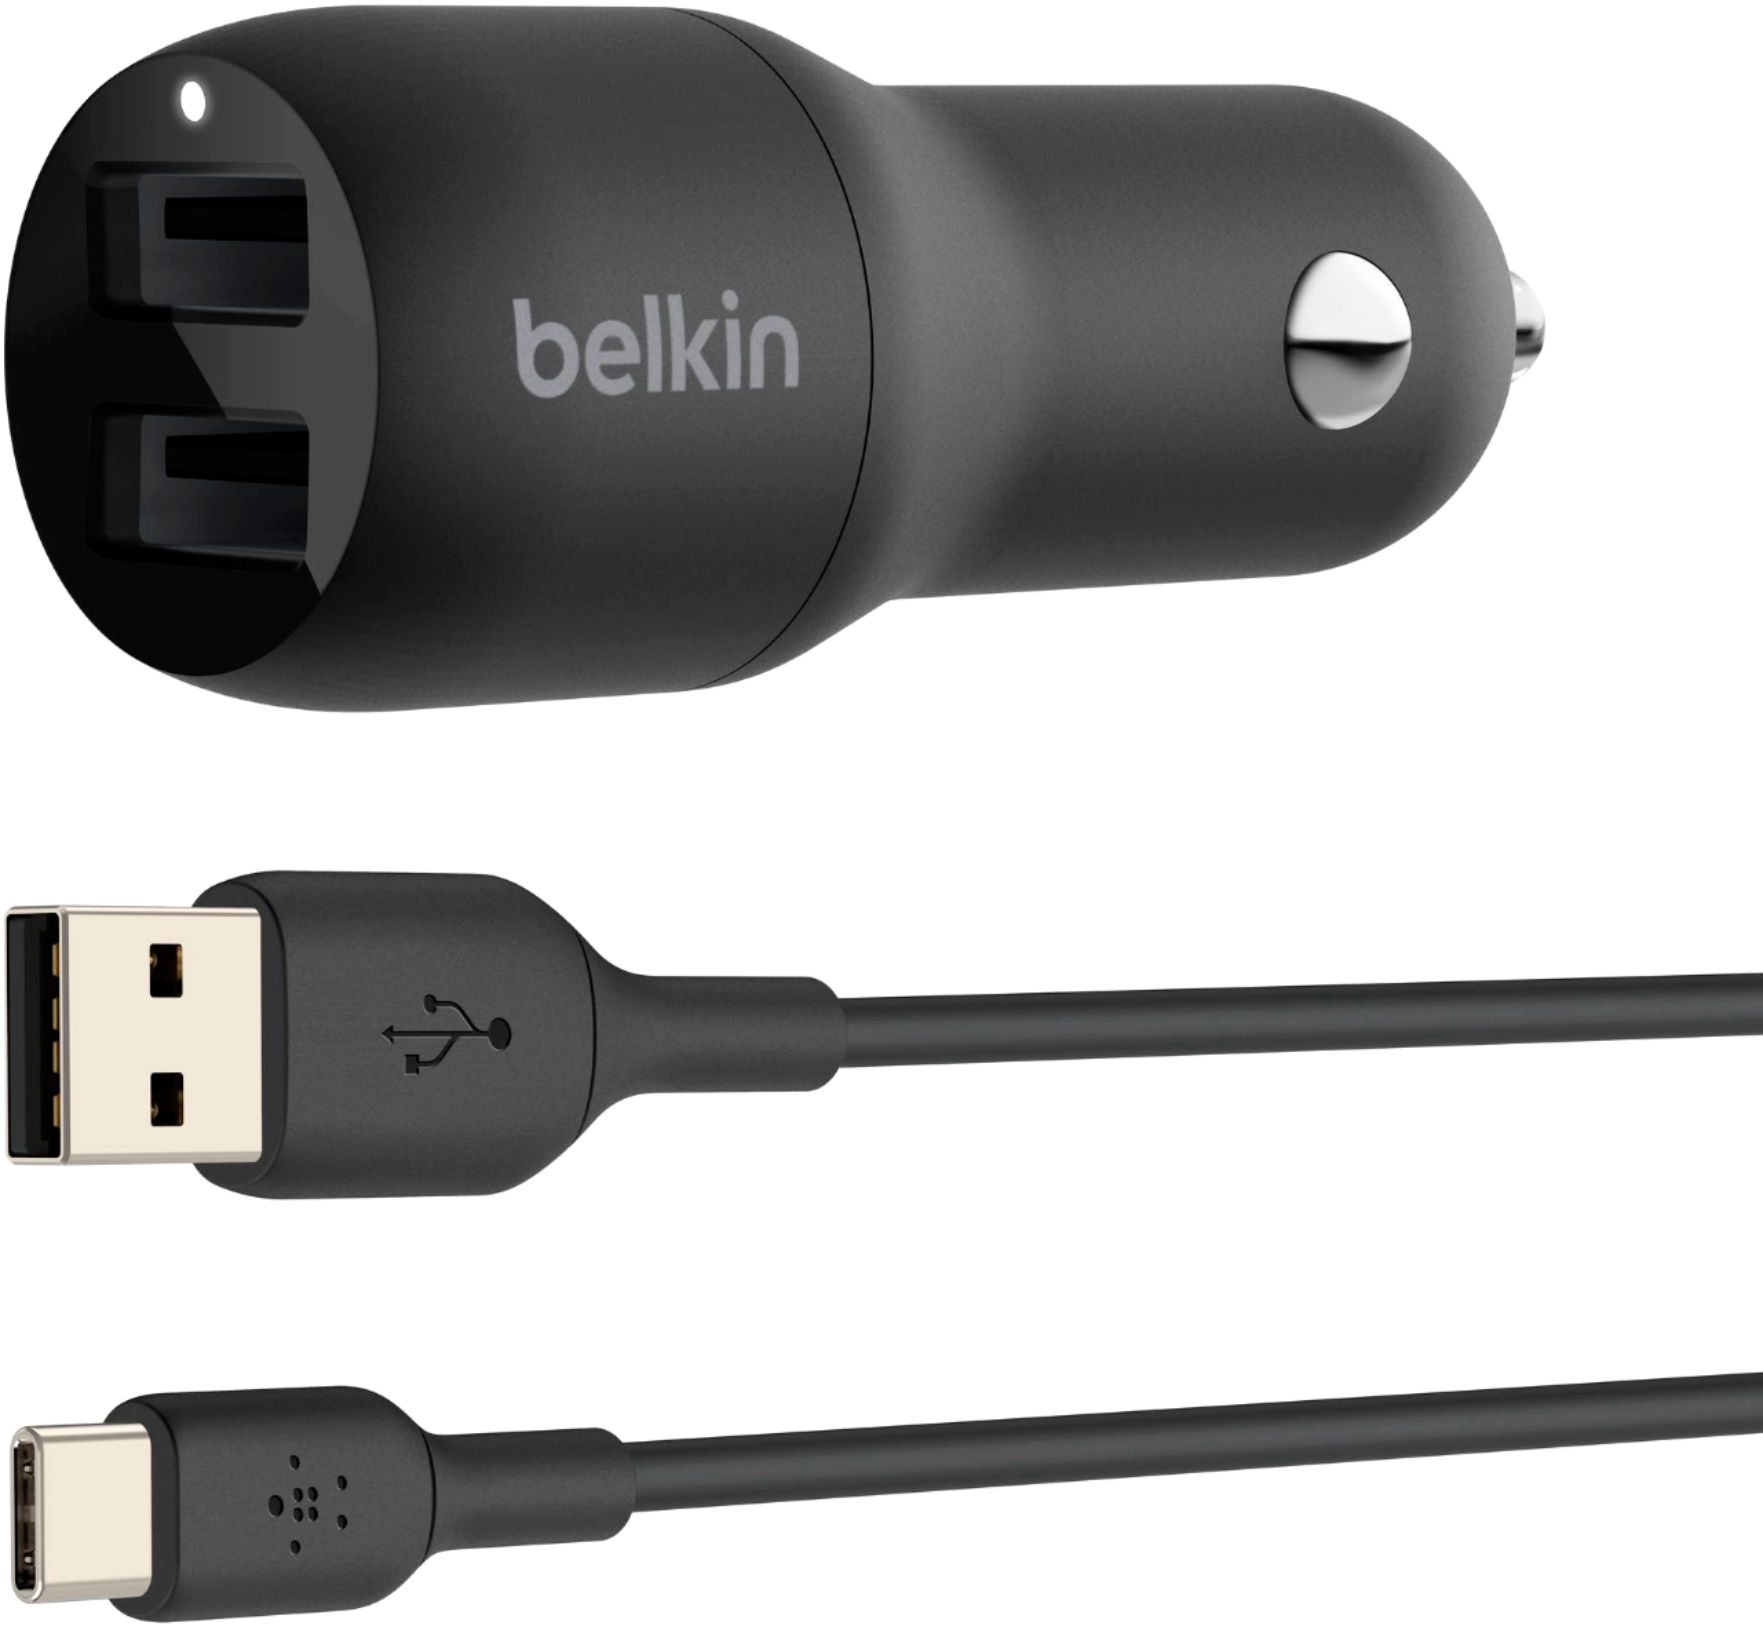 Belkin 24W Dual USB Car Charger 2 12W USB A Ports with USB-C Cable Fast  Charging iPhone, Samsung Galaxy, AirPods & More Black CCE001BT1MBK - Best  Buy